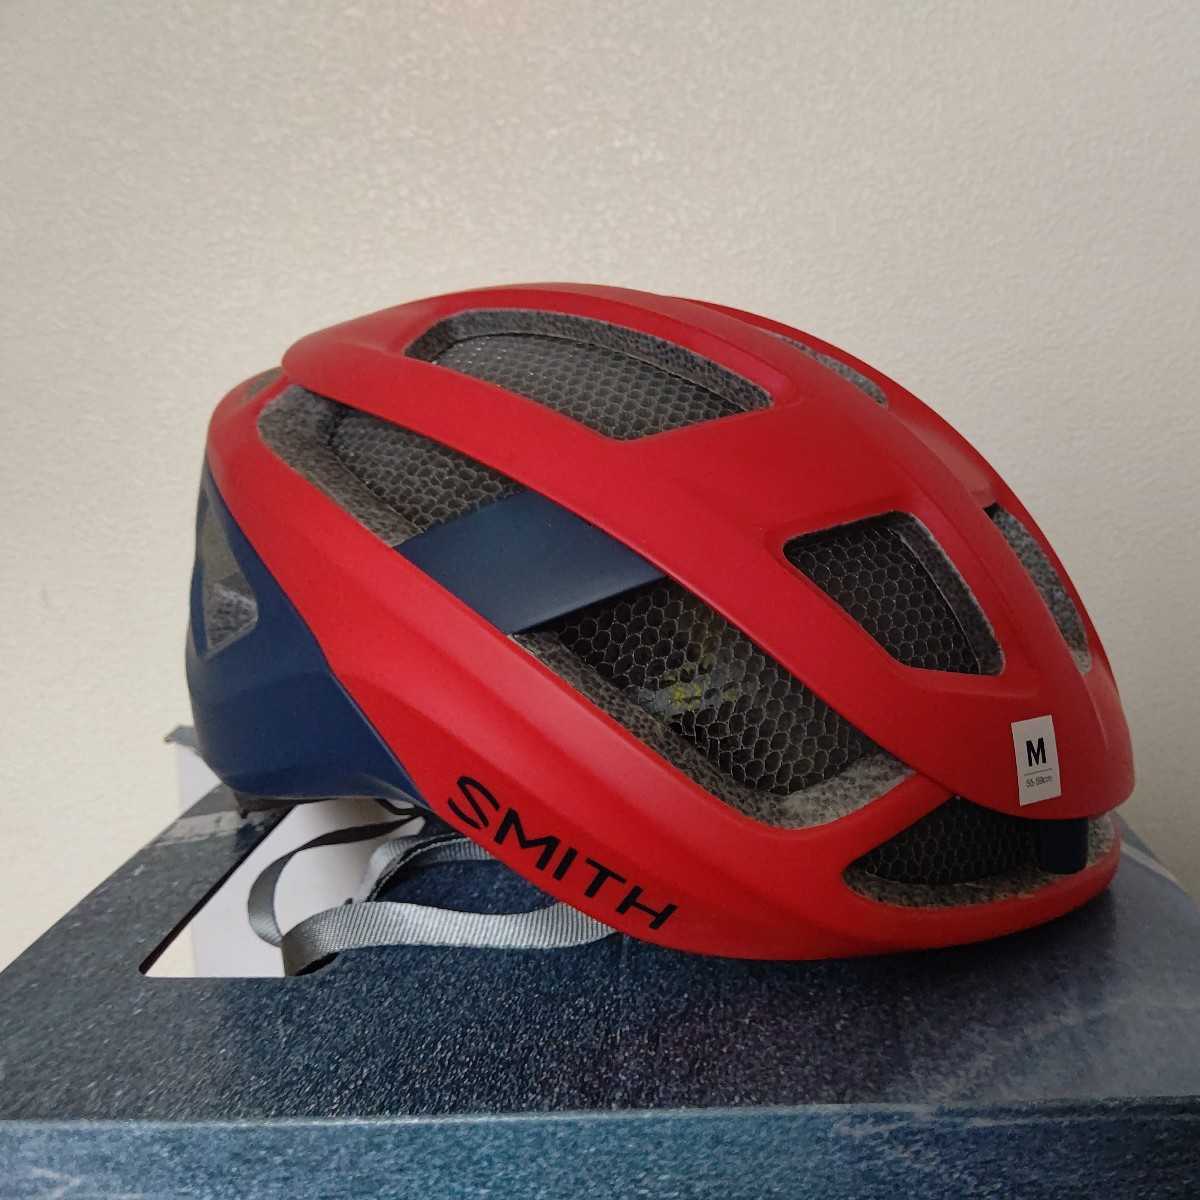 SMITH Trace MIPS Road Helmet M Size 自転車用ヘルメット_画像2